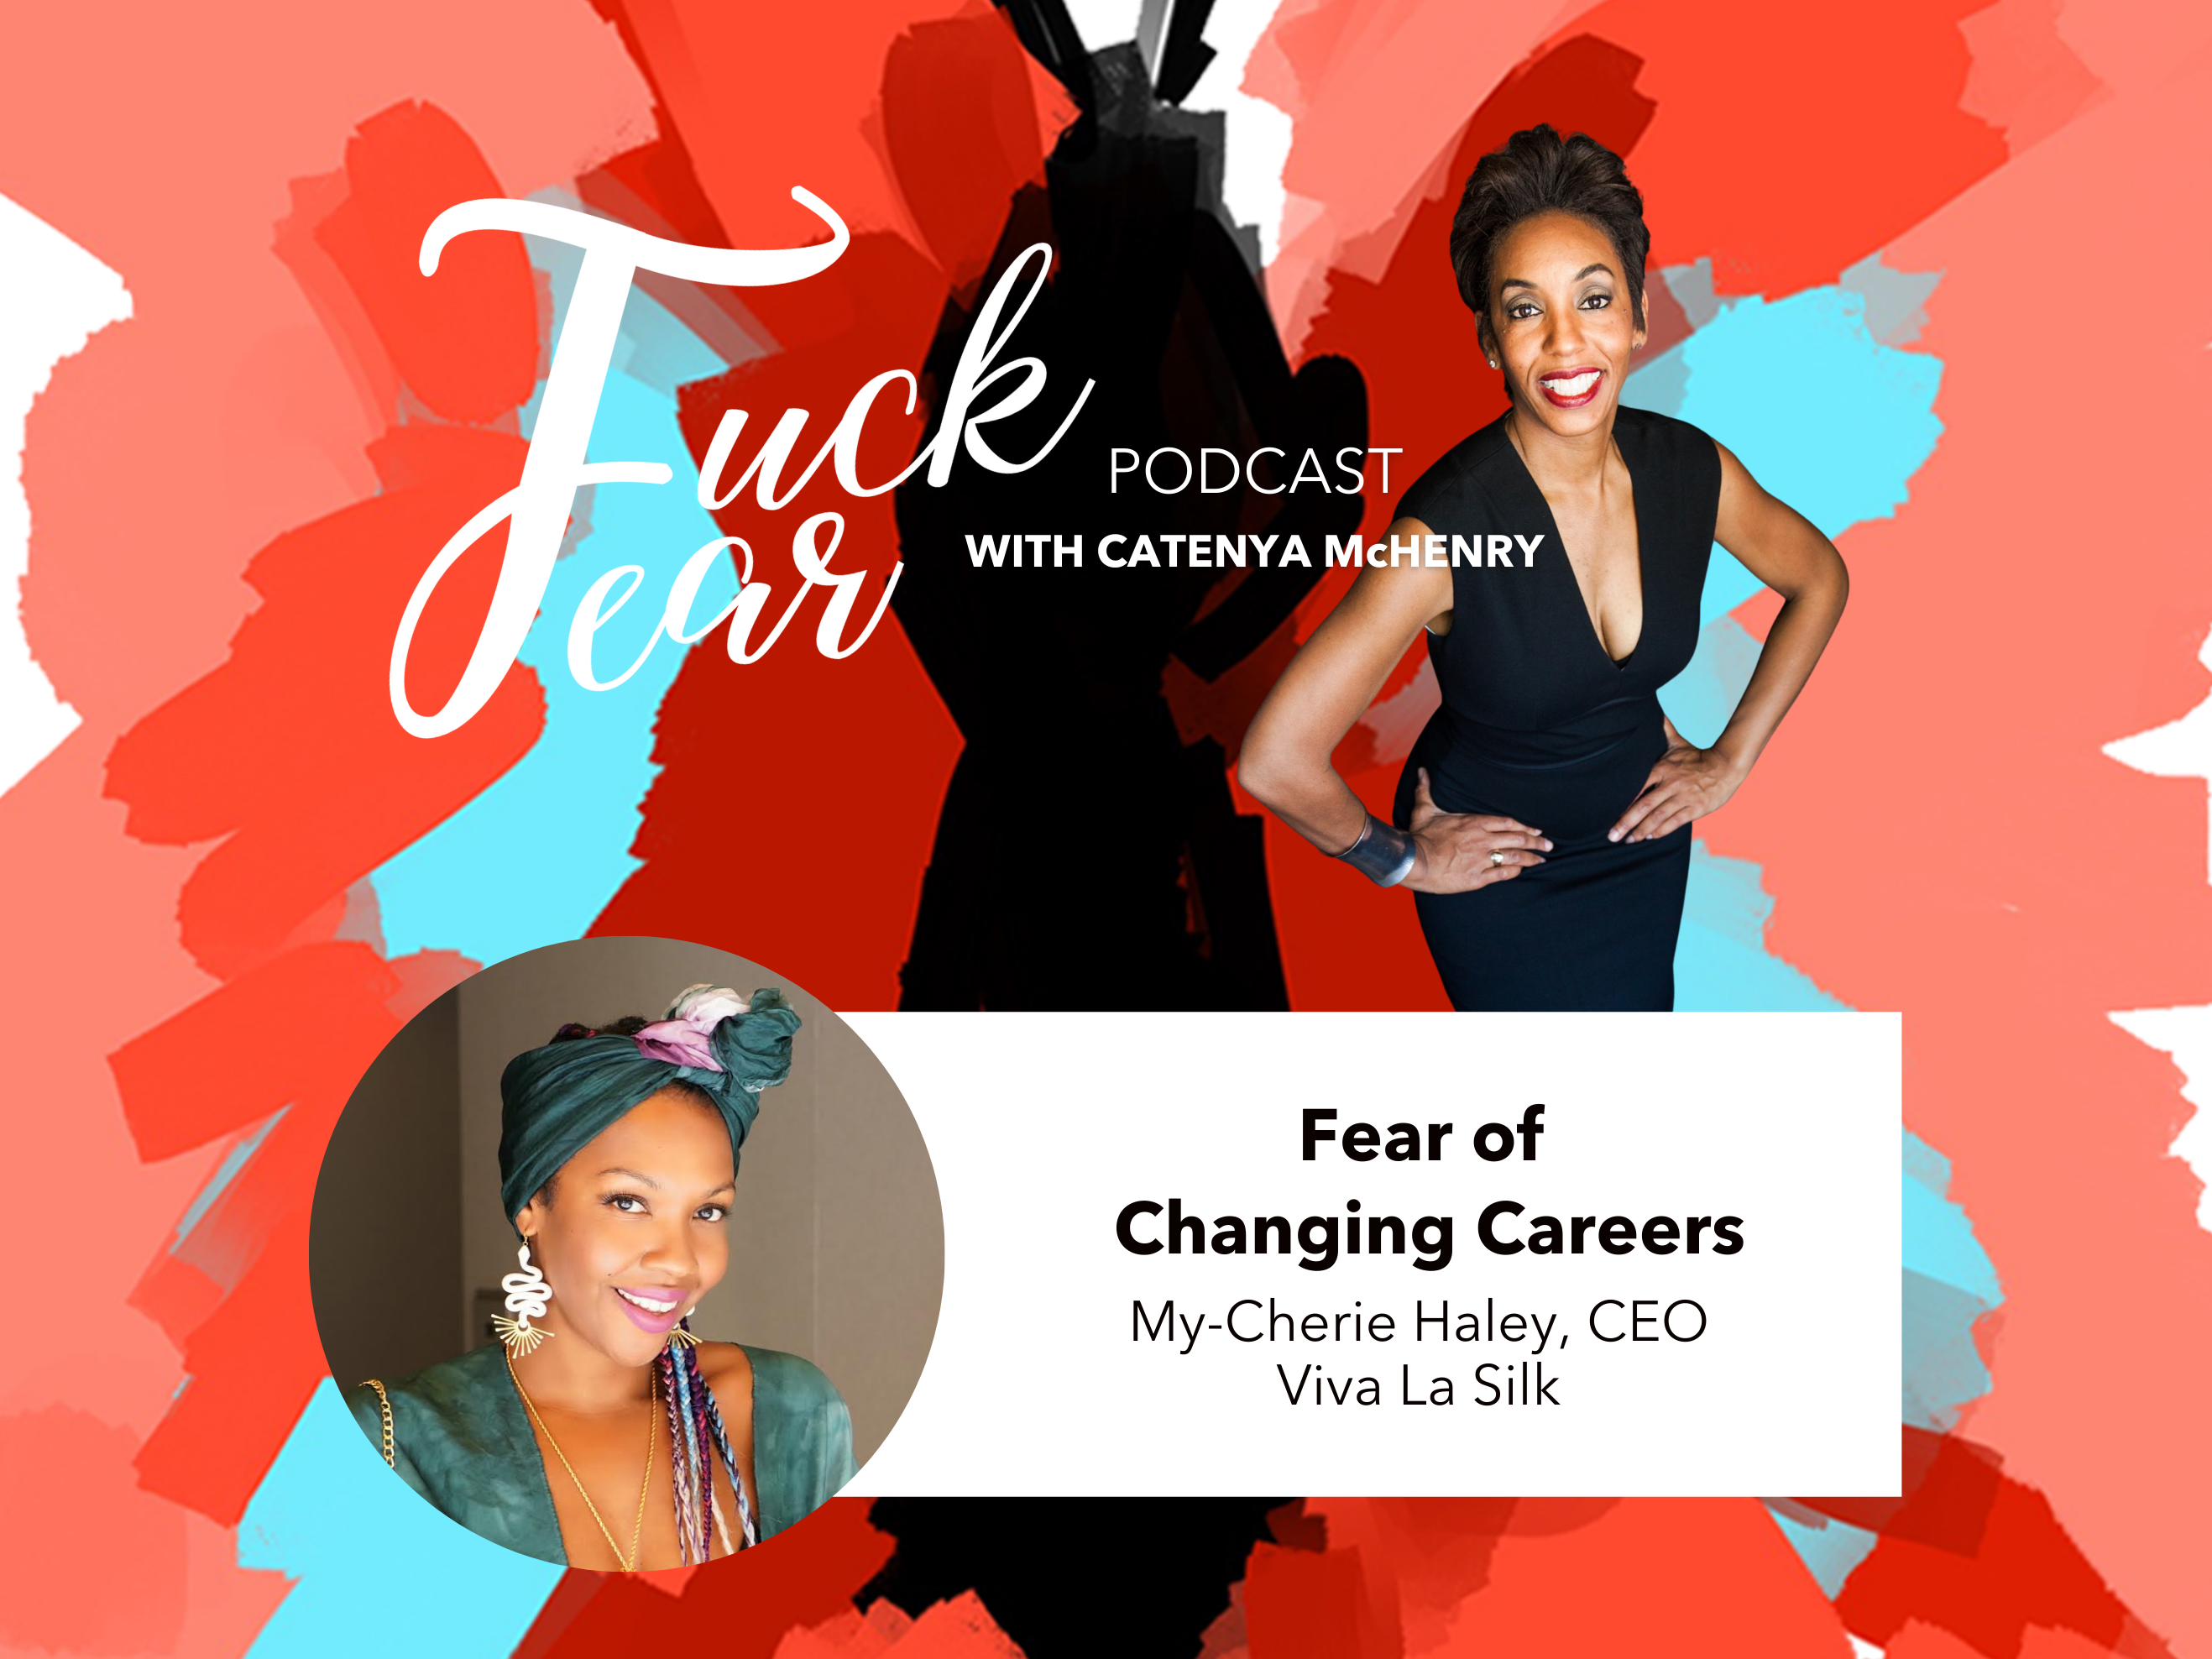 Fear of Changing Careers Fuck Fear Podcast episode with My-Cherie Haley, CEO of Viva La Silk 